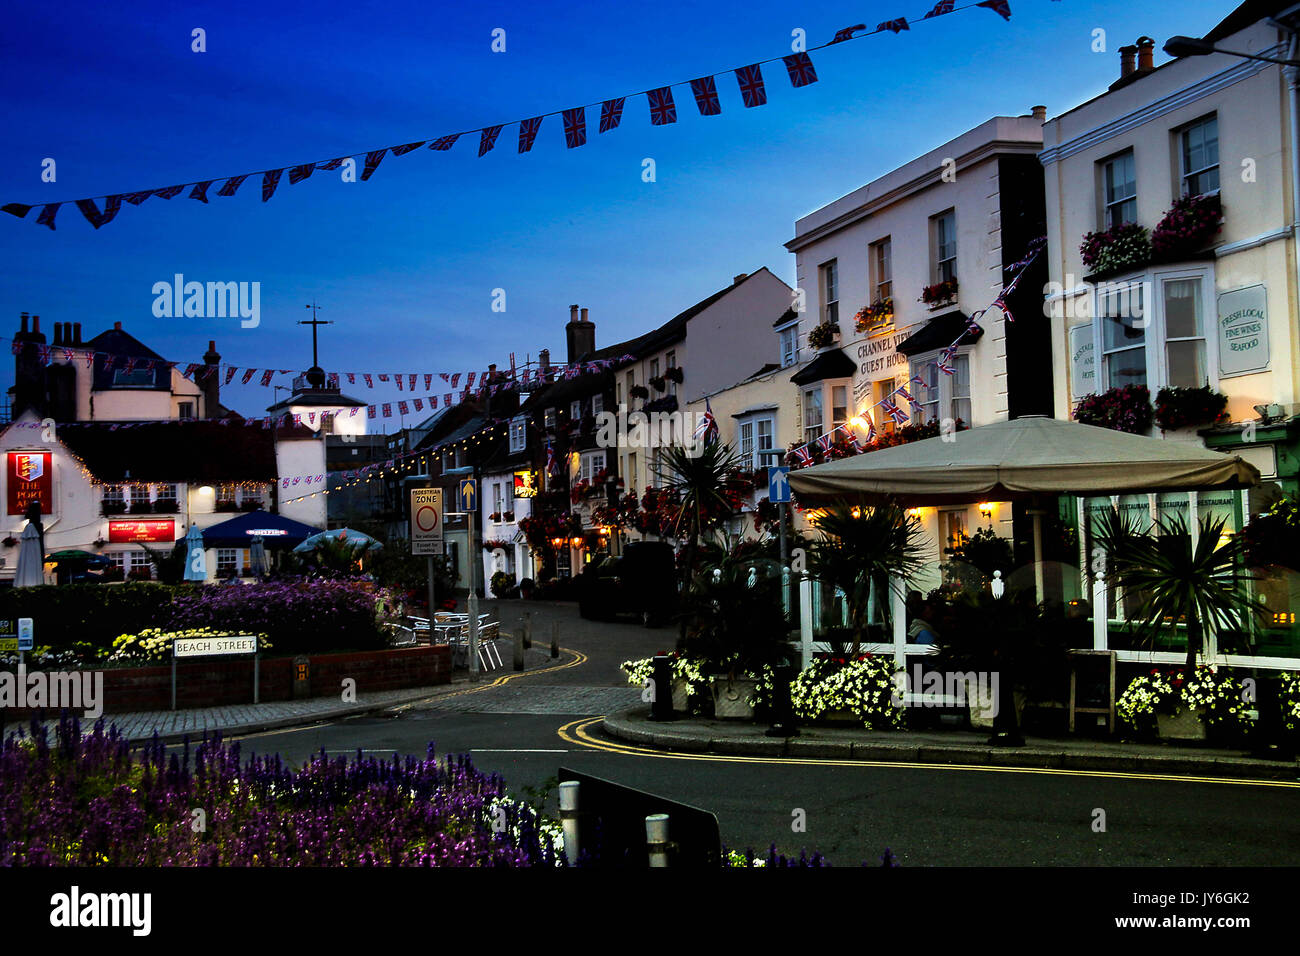 Deal Town seafront at night Stock Photo - Alamy